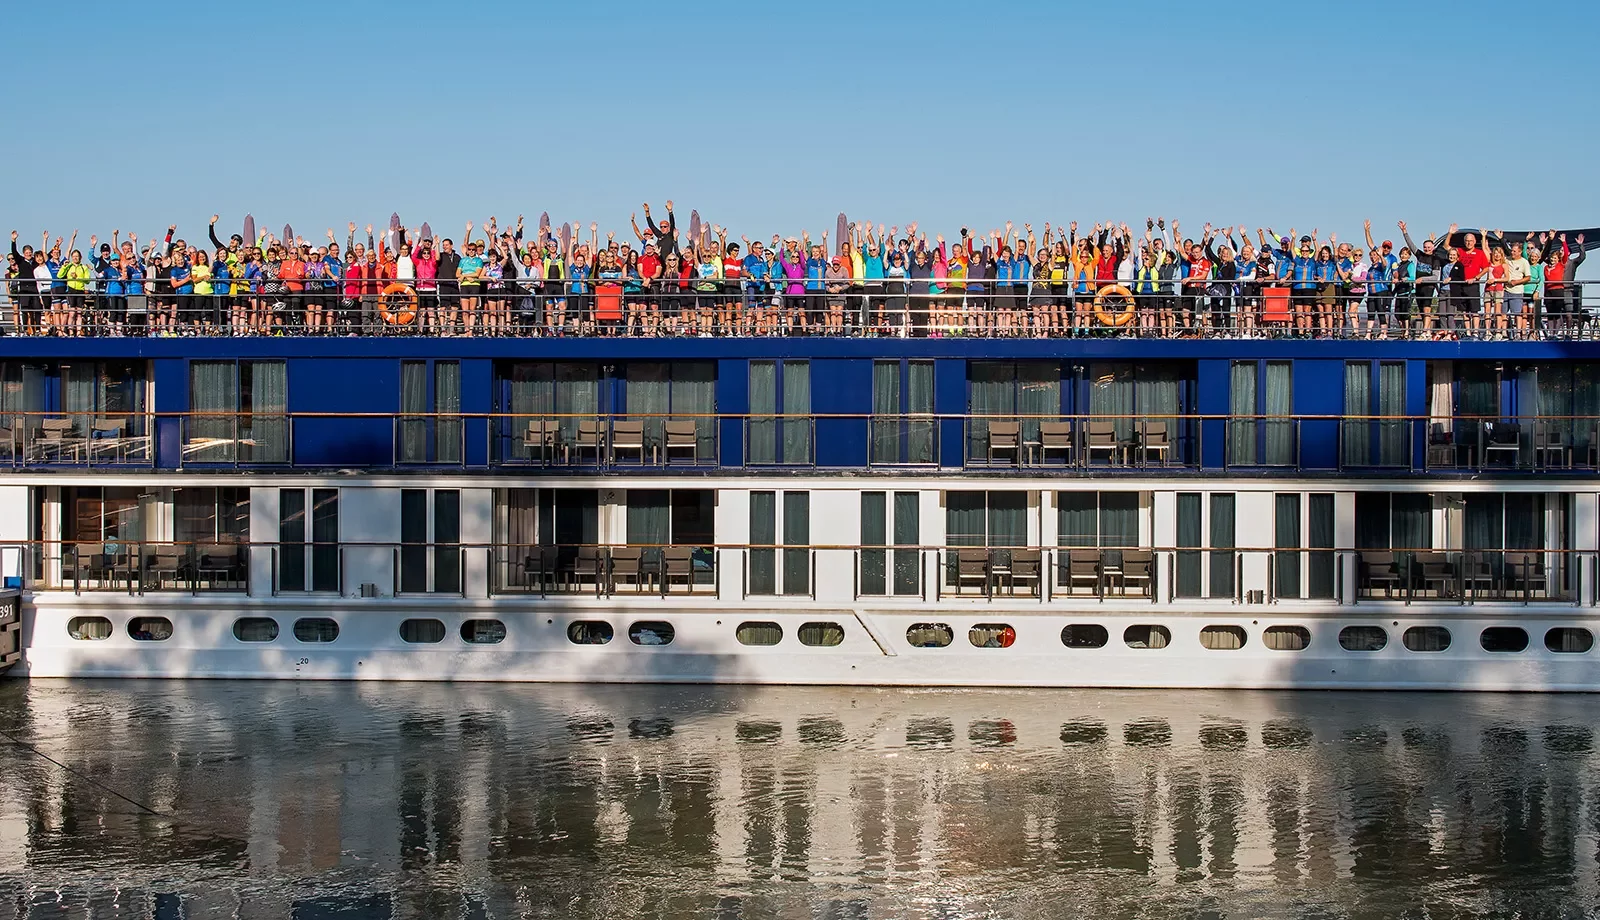 Cruise guests gathered on top deck, celebrating.